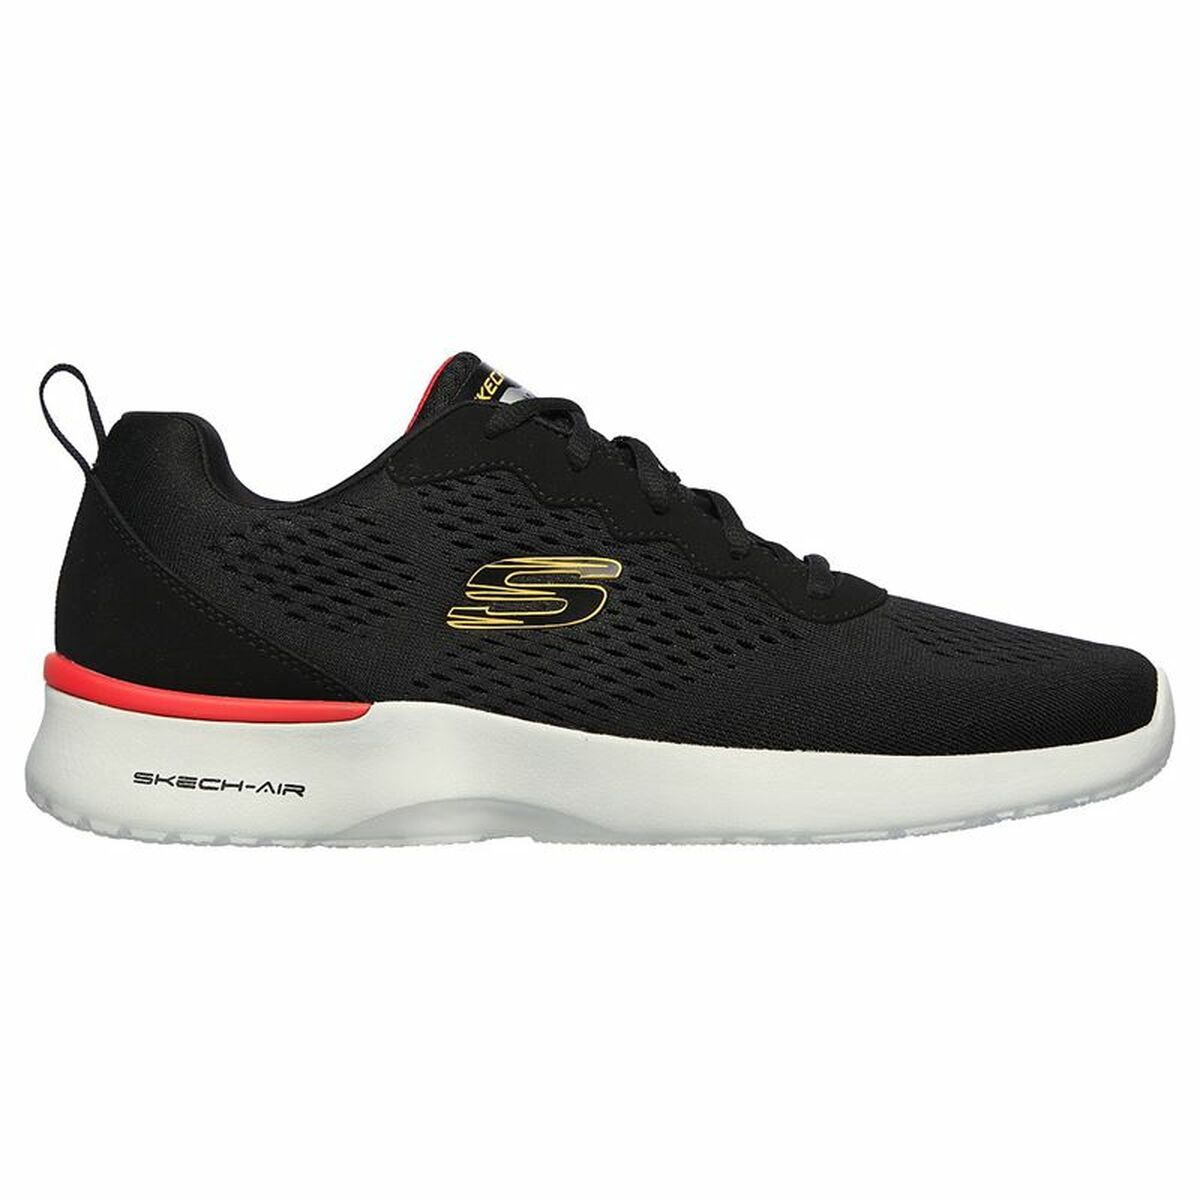 Sapatilhas Skechers Dynamight - negro - 